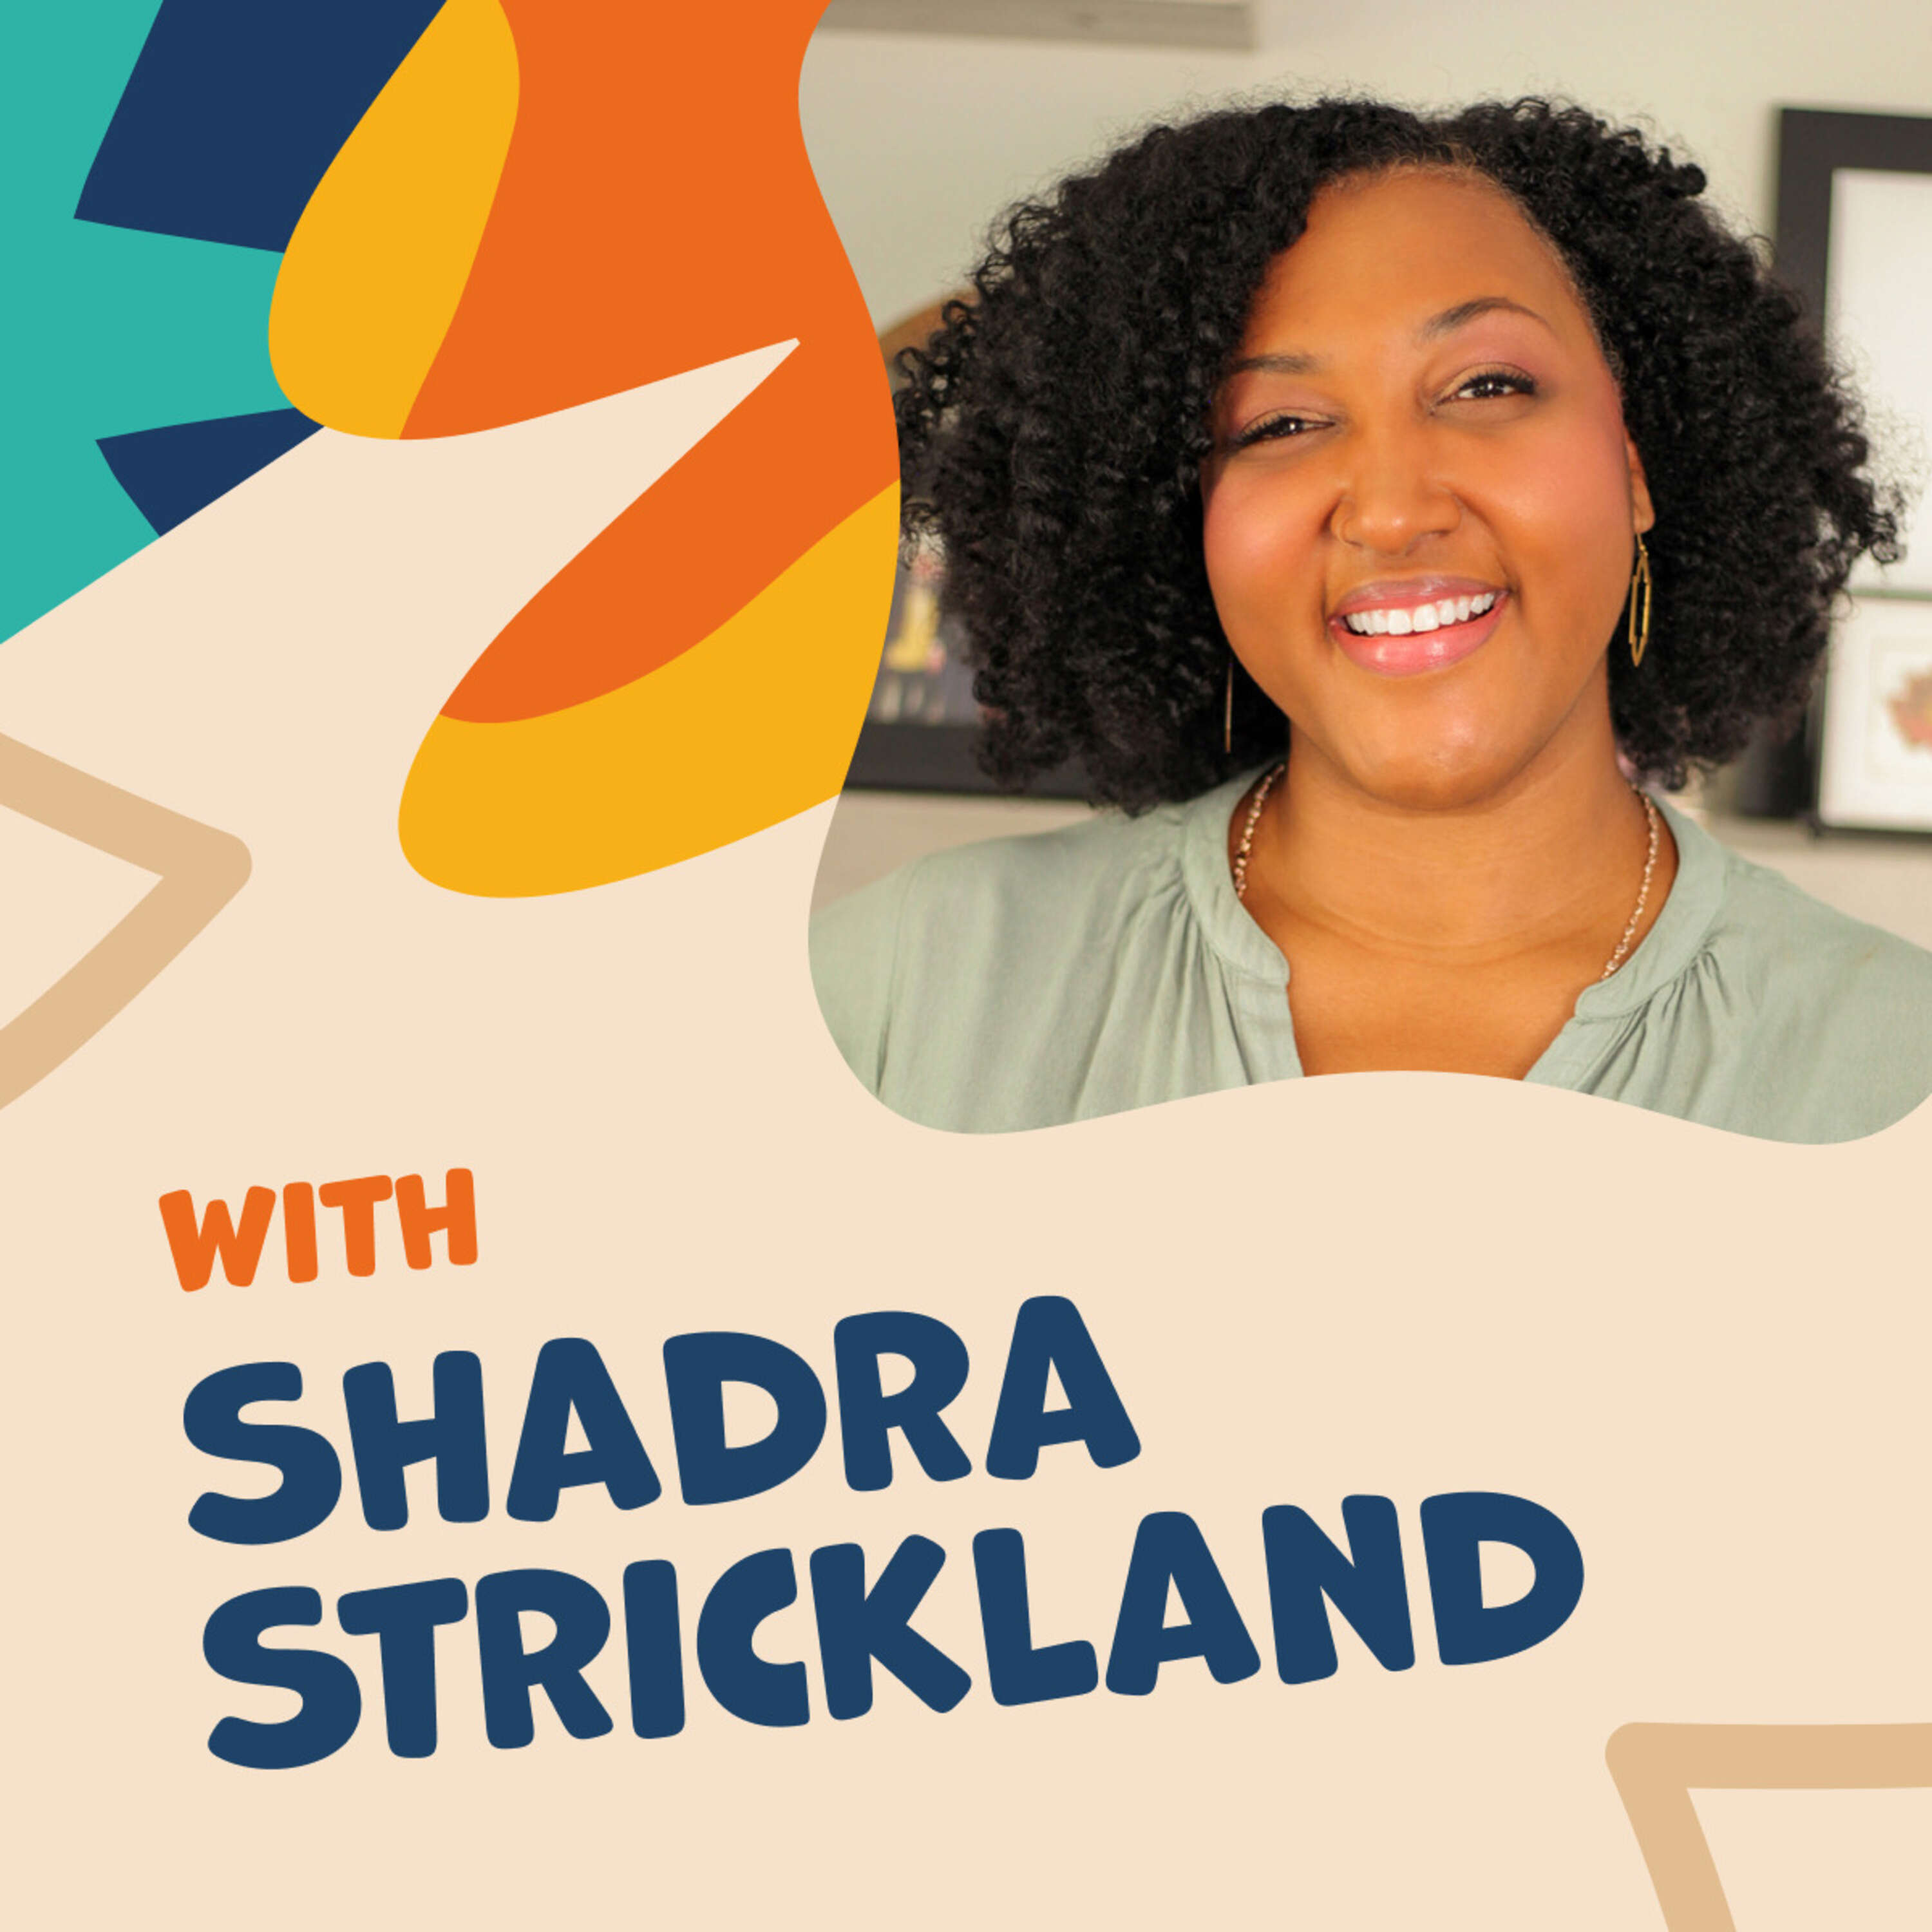 Inflection Point: Shadra Strickland Puts the Dash in Author-Illustrator